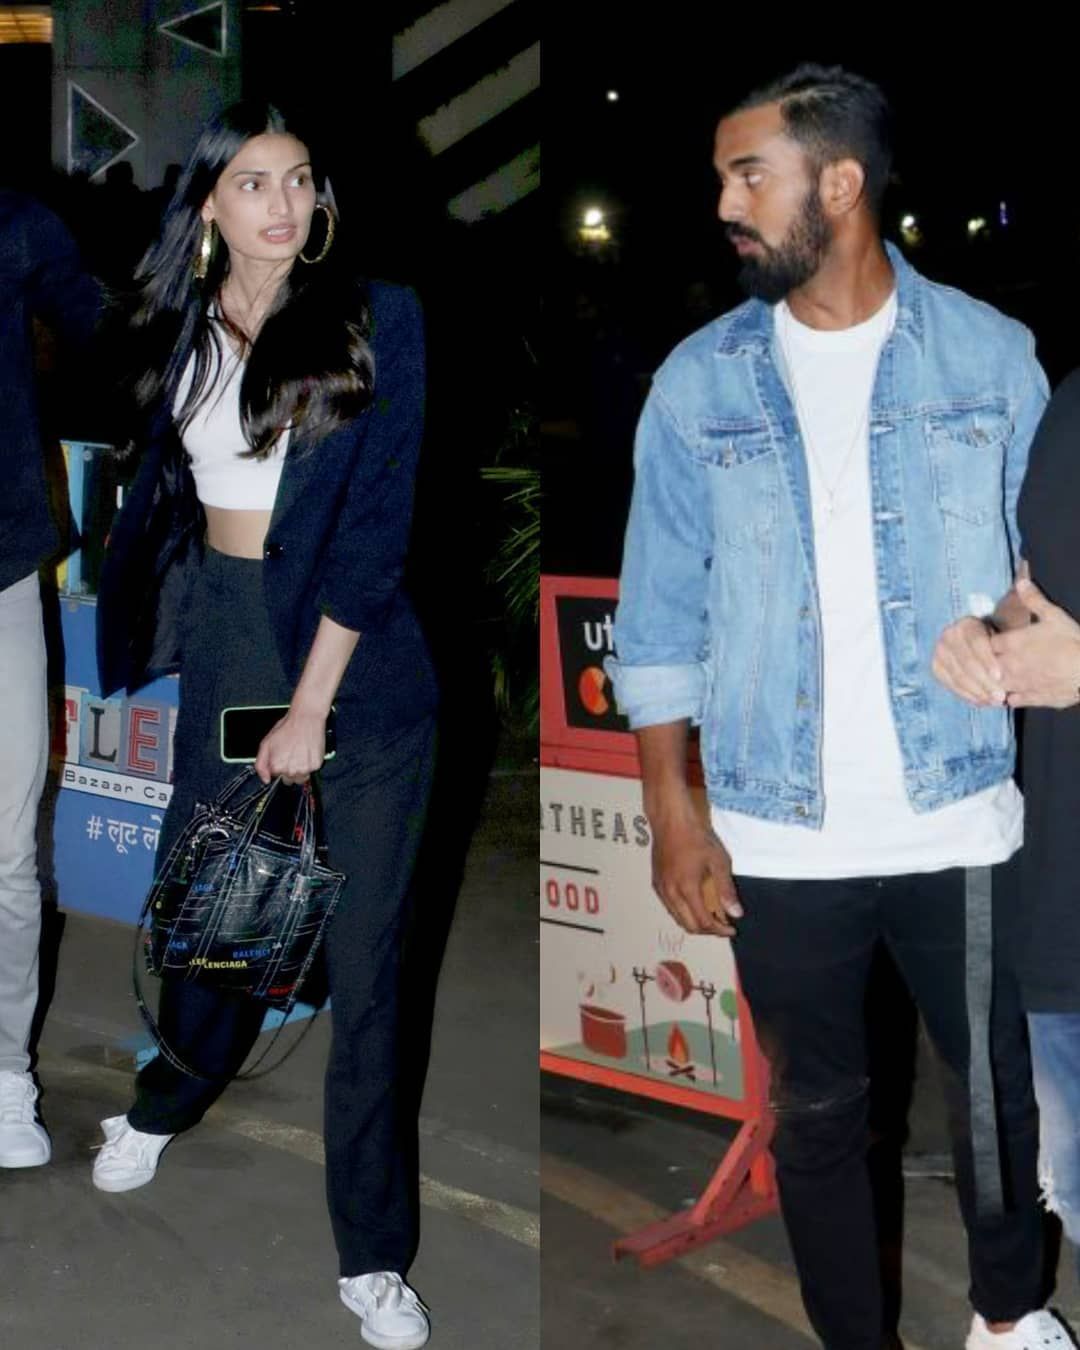 Athiya Shetty And Cricketer KL Rahul Spark Relationship Rumours As They Are Spotted Heading For Dinner Together